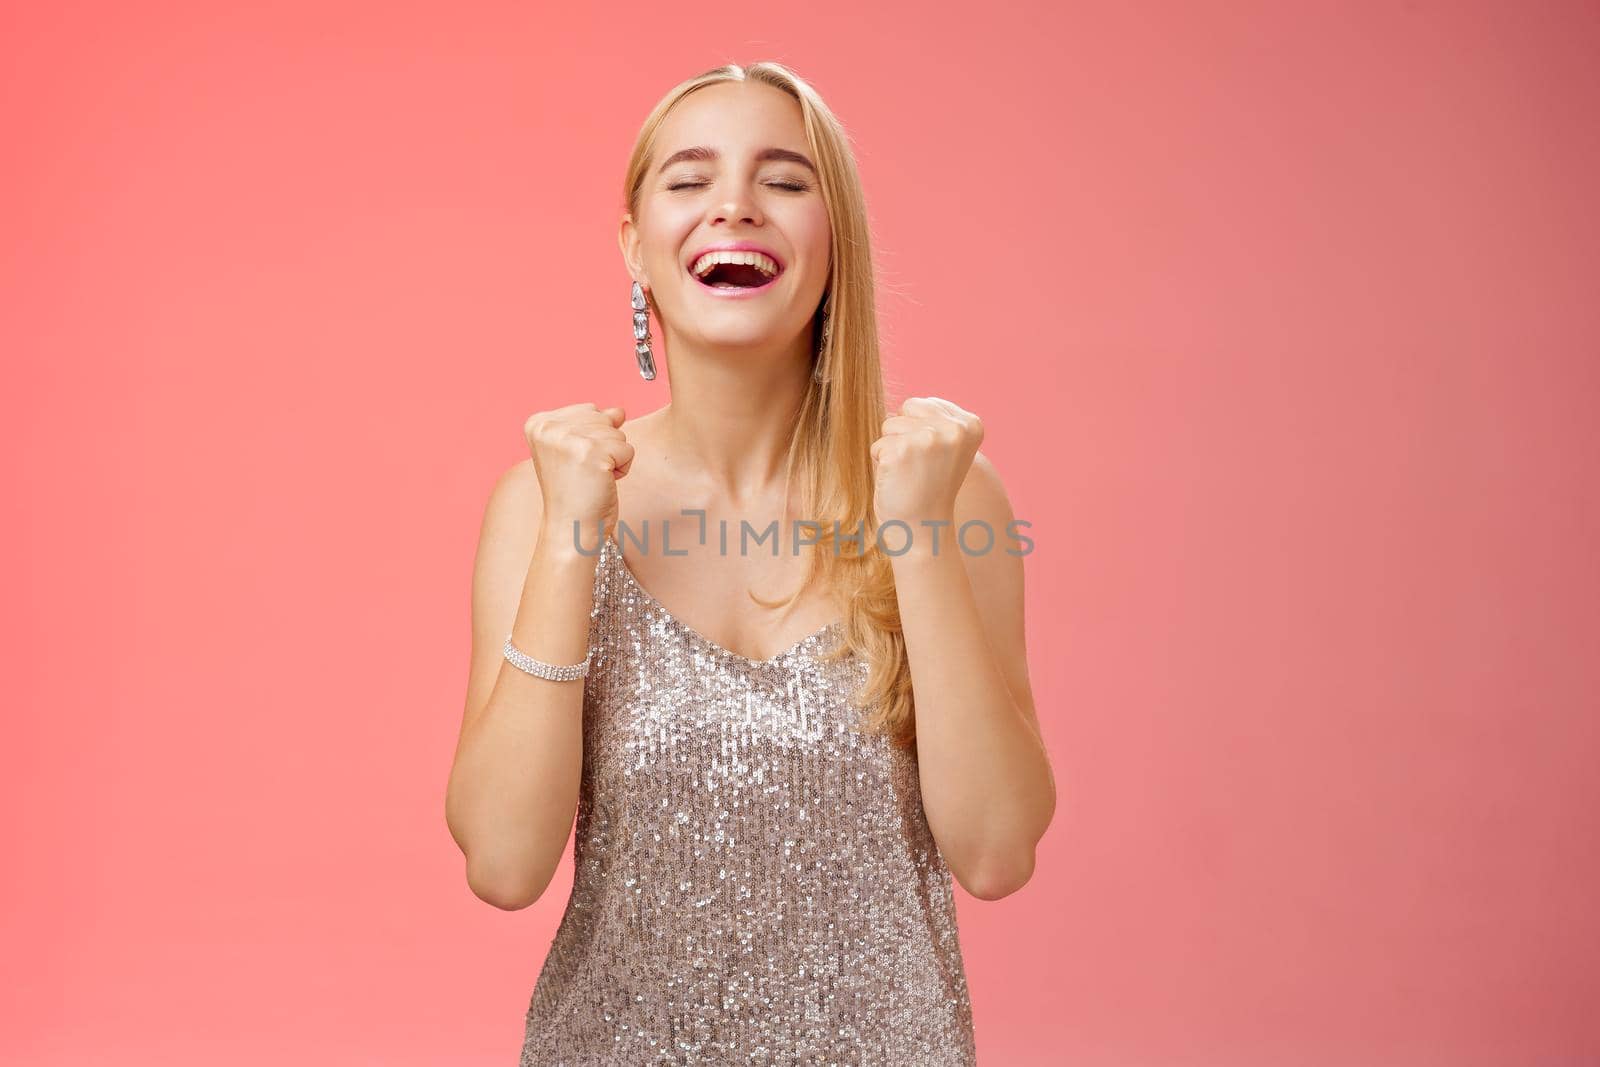 Lifestyle. Girl finally achieve goal say yes relieved happily clench fists close eyes triumphing celebrating victory standing thrilled in glittering luxurious dress winning first prize fashion contest.